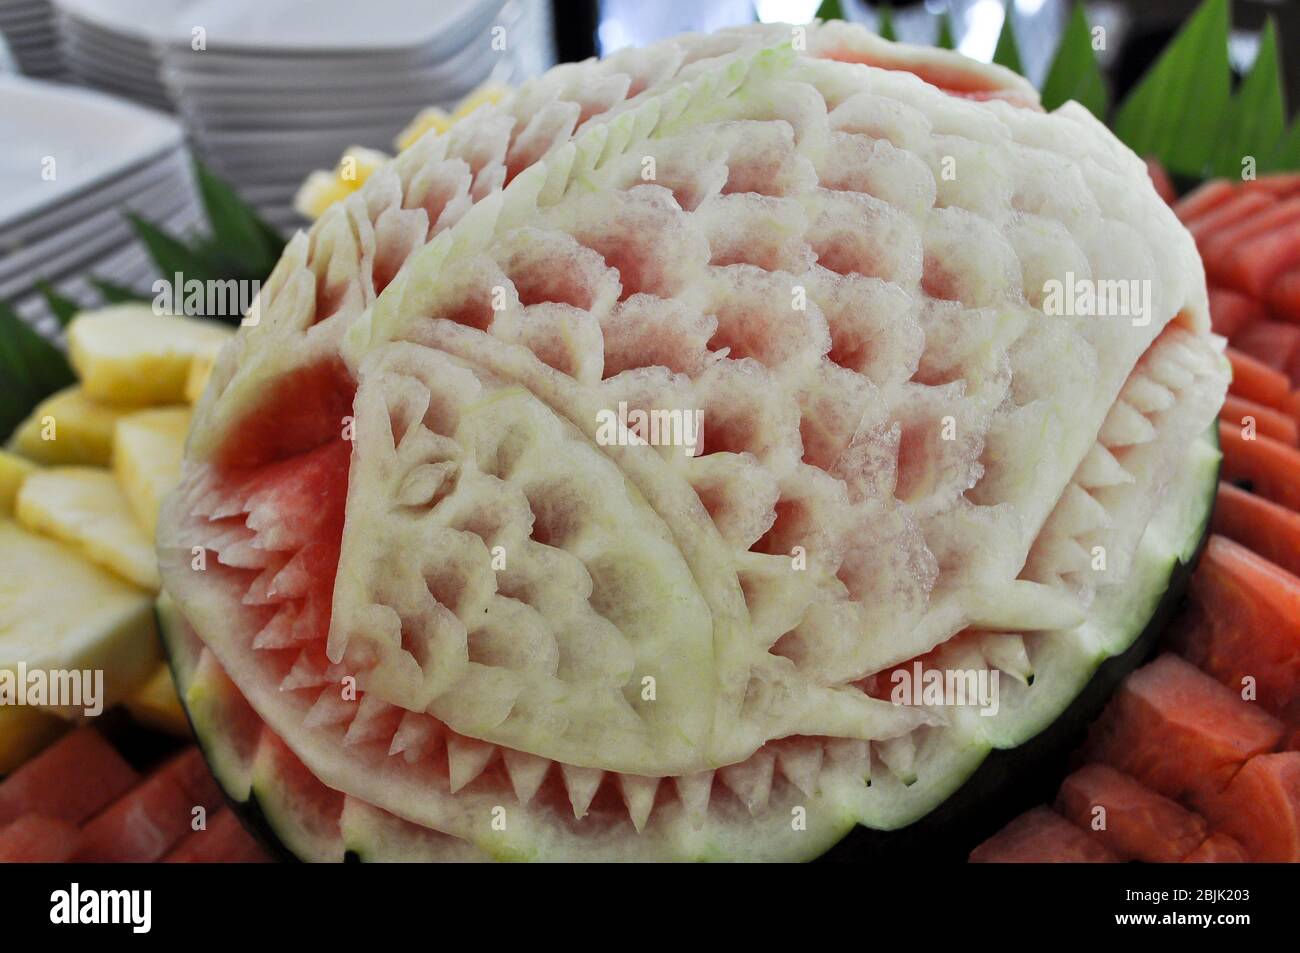 Watermelon carving on food sets Stock Photo